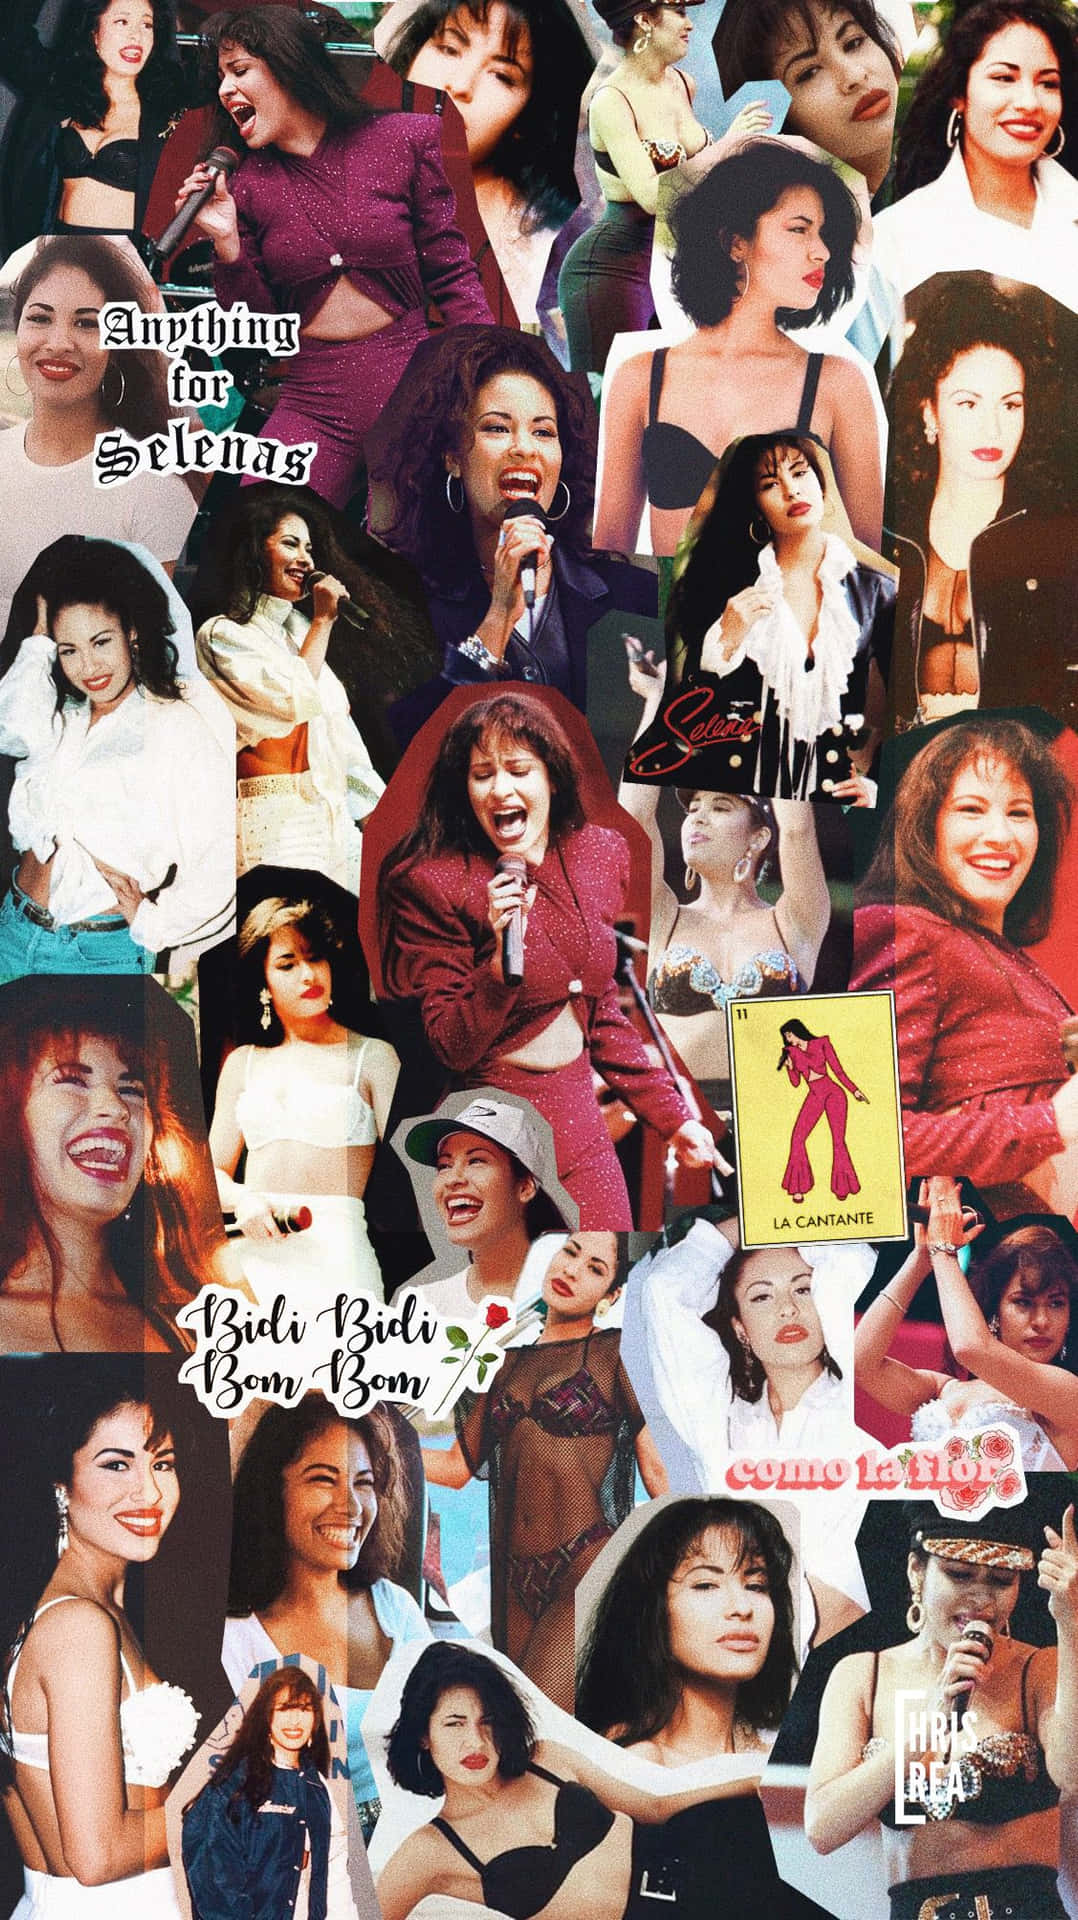 Show your love for Selena Quintanilla by using her iconic image as your iPhone wallpaper. Wallpaper